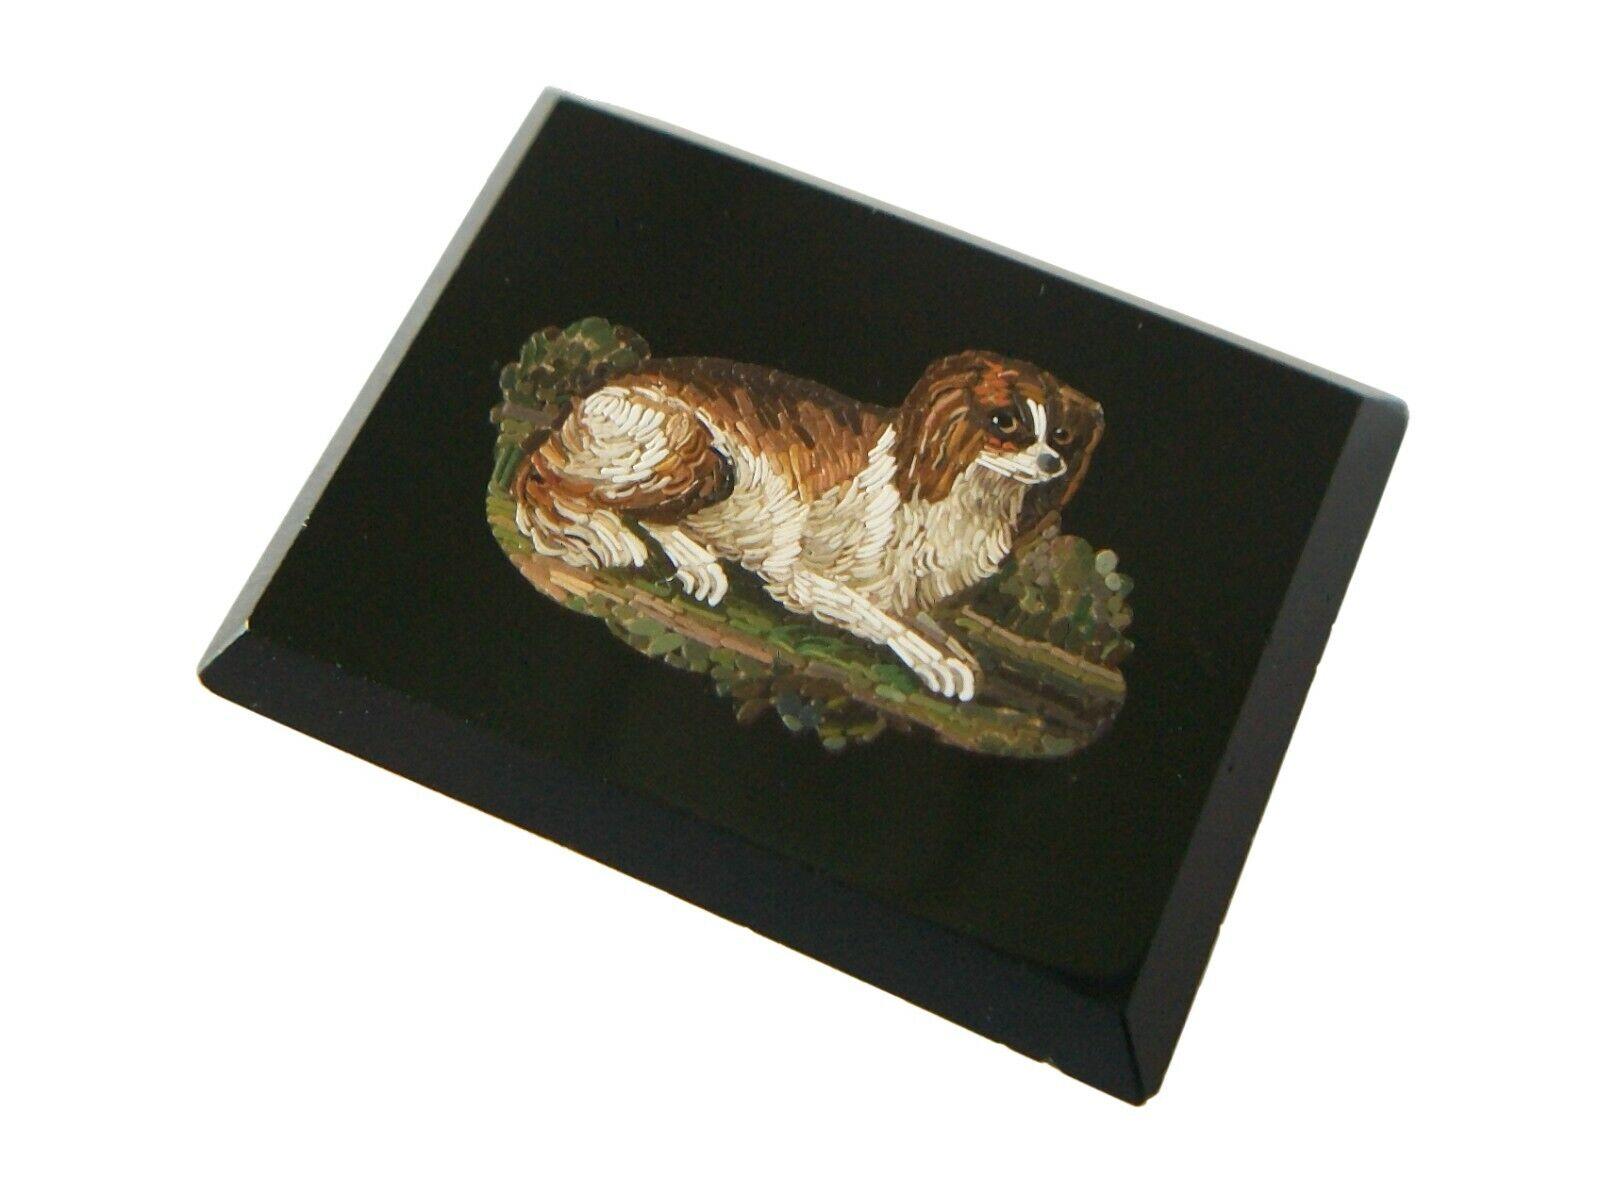 Antique Grand Tour 'King Charles Cavalier Spaniel' micro mosaic plaque - hand made to the finest quality with great detail - may be framed or mounted in a custom piece of jewelry - unsigned - Italy - circa 1850.

Excellent antique condition - all